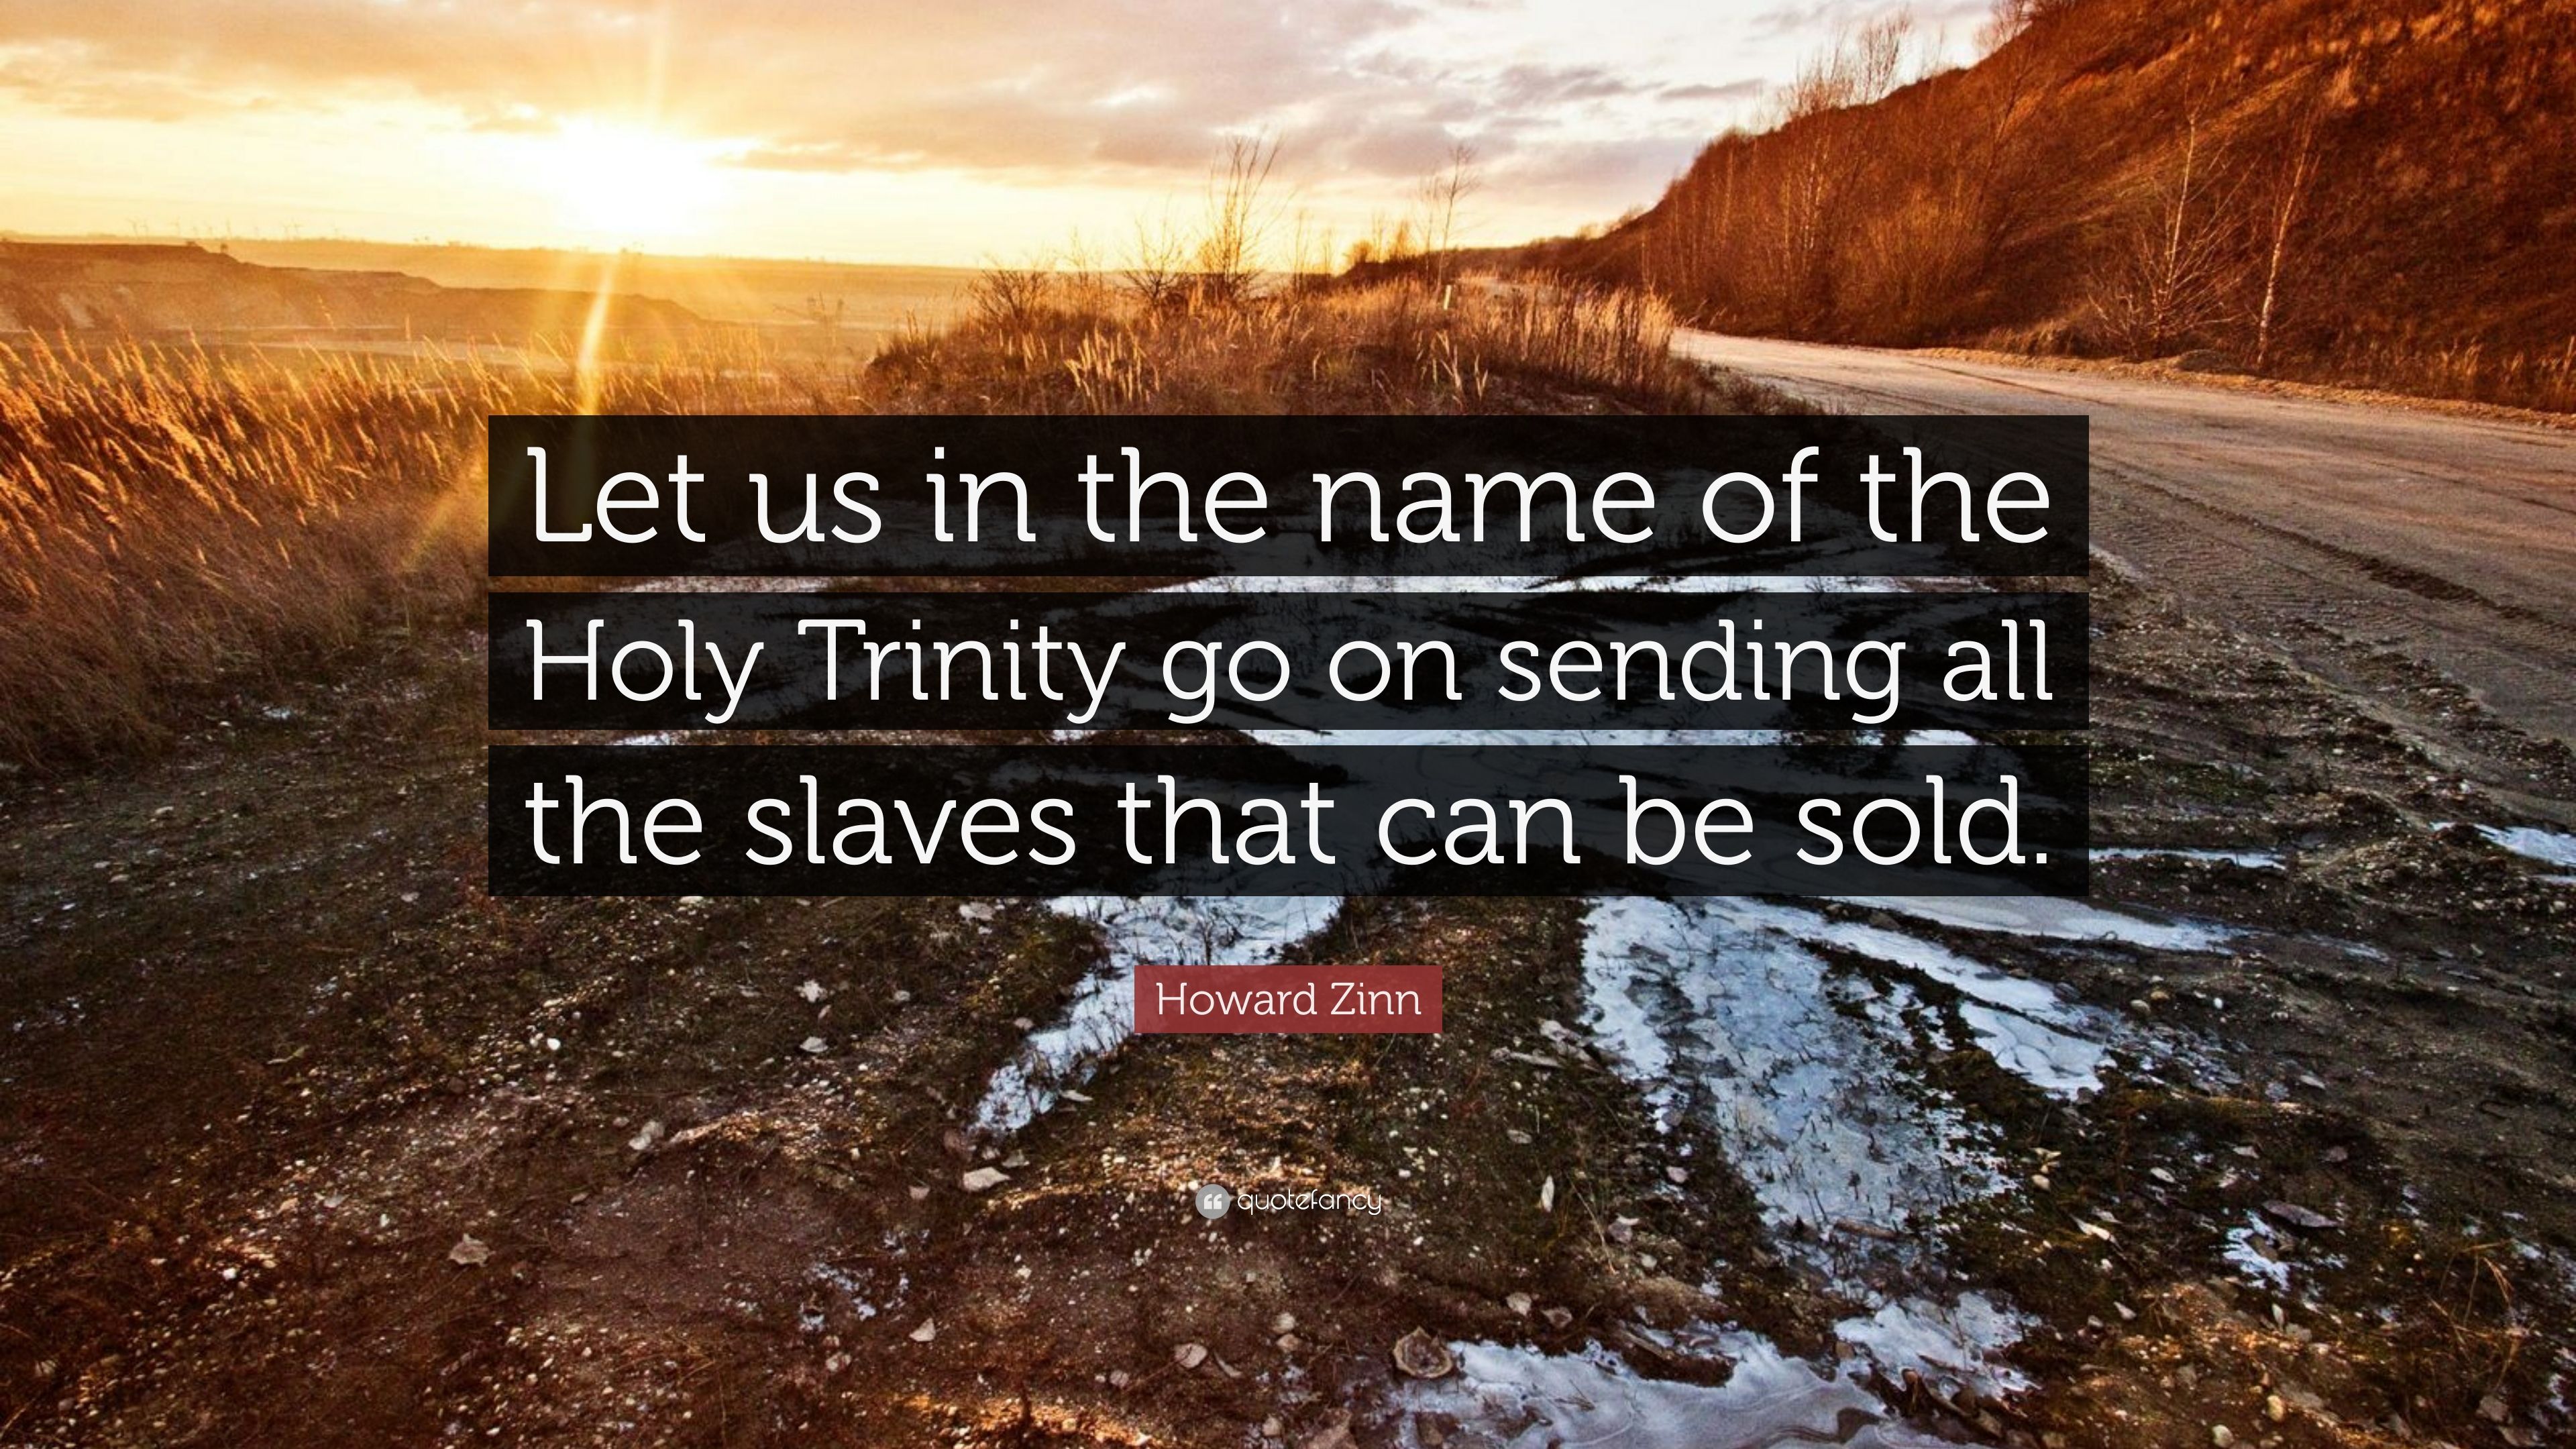 Howard Zinn Quote: “Let us in the name of the Holy Trinity go